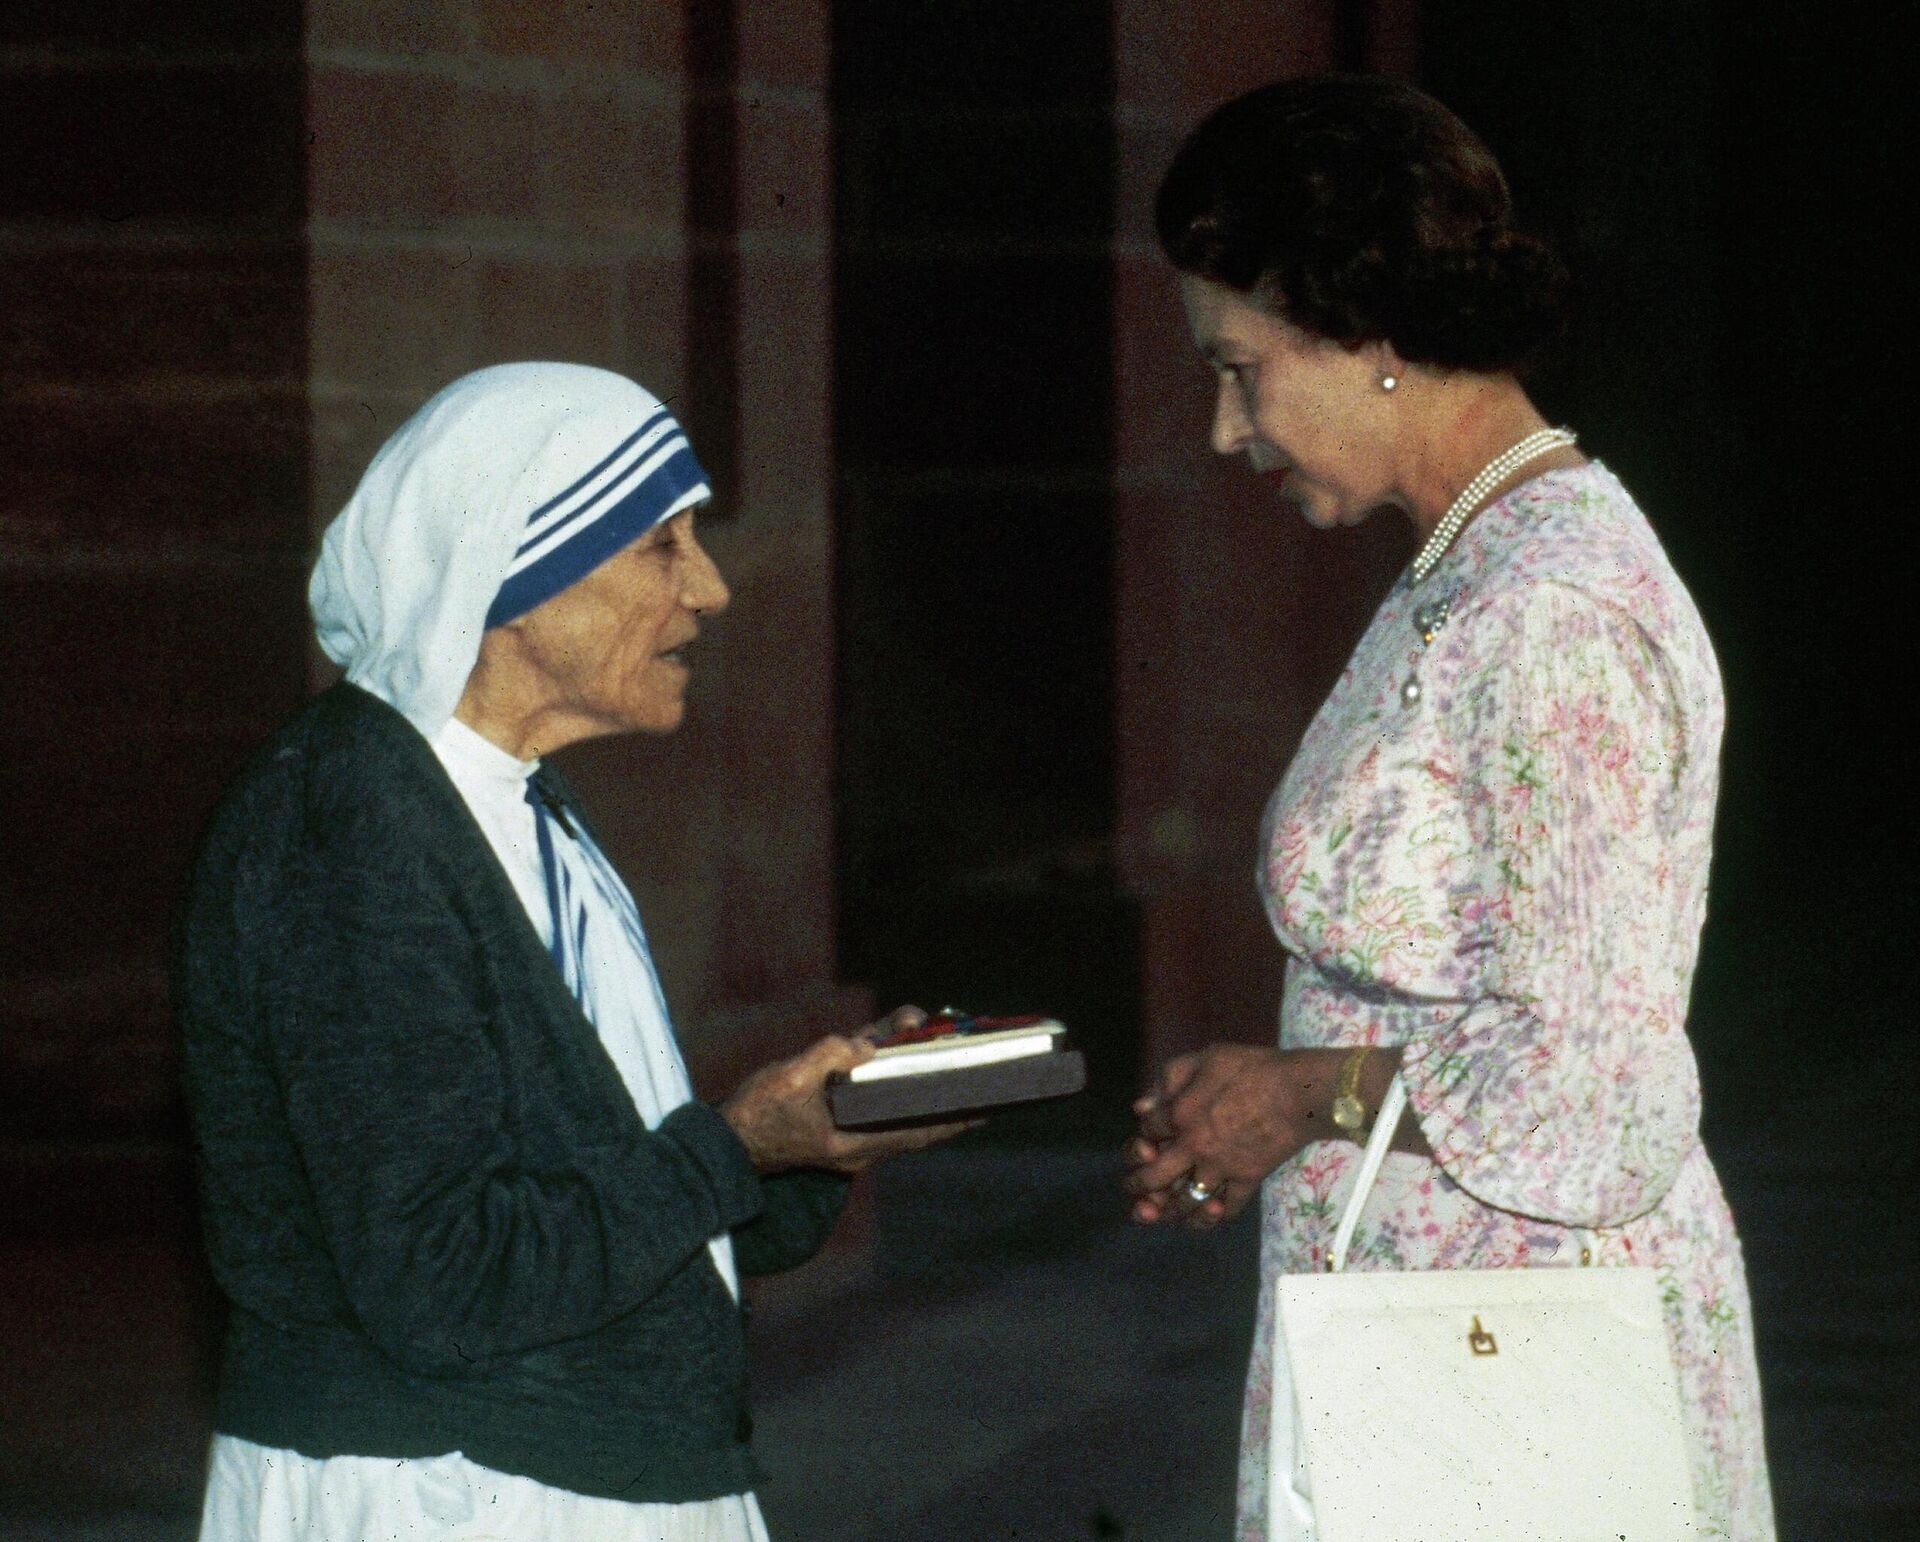 FILE - In this Nov. 24, 1983 file photo, Mother Teresa of Calcutta, left, receives the Insignia of the Honorary Order of Merit from Britain'sQueen Elizabeth II at the Rashtrapati Shavar in New Delhi. Queen Elizabeth II, Britain’s longest-reigning monarch and a rock of stability across much of a turbulent century, has died. She was 96. Buckingham Palace made the announcement in a statement on Thursday Sept. 8, 2022 - Sputnik International, 1920, 09.09.2022